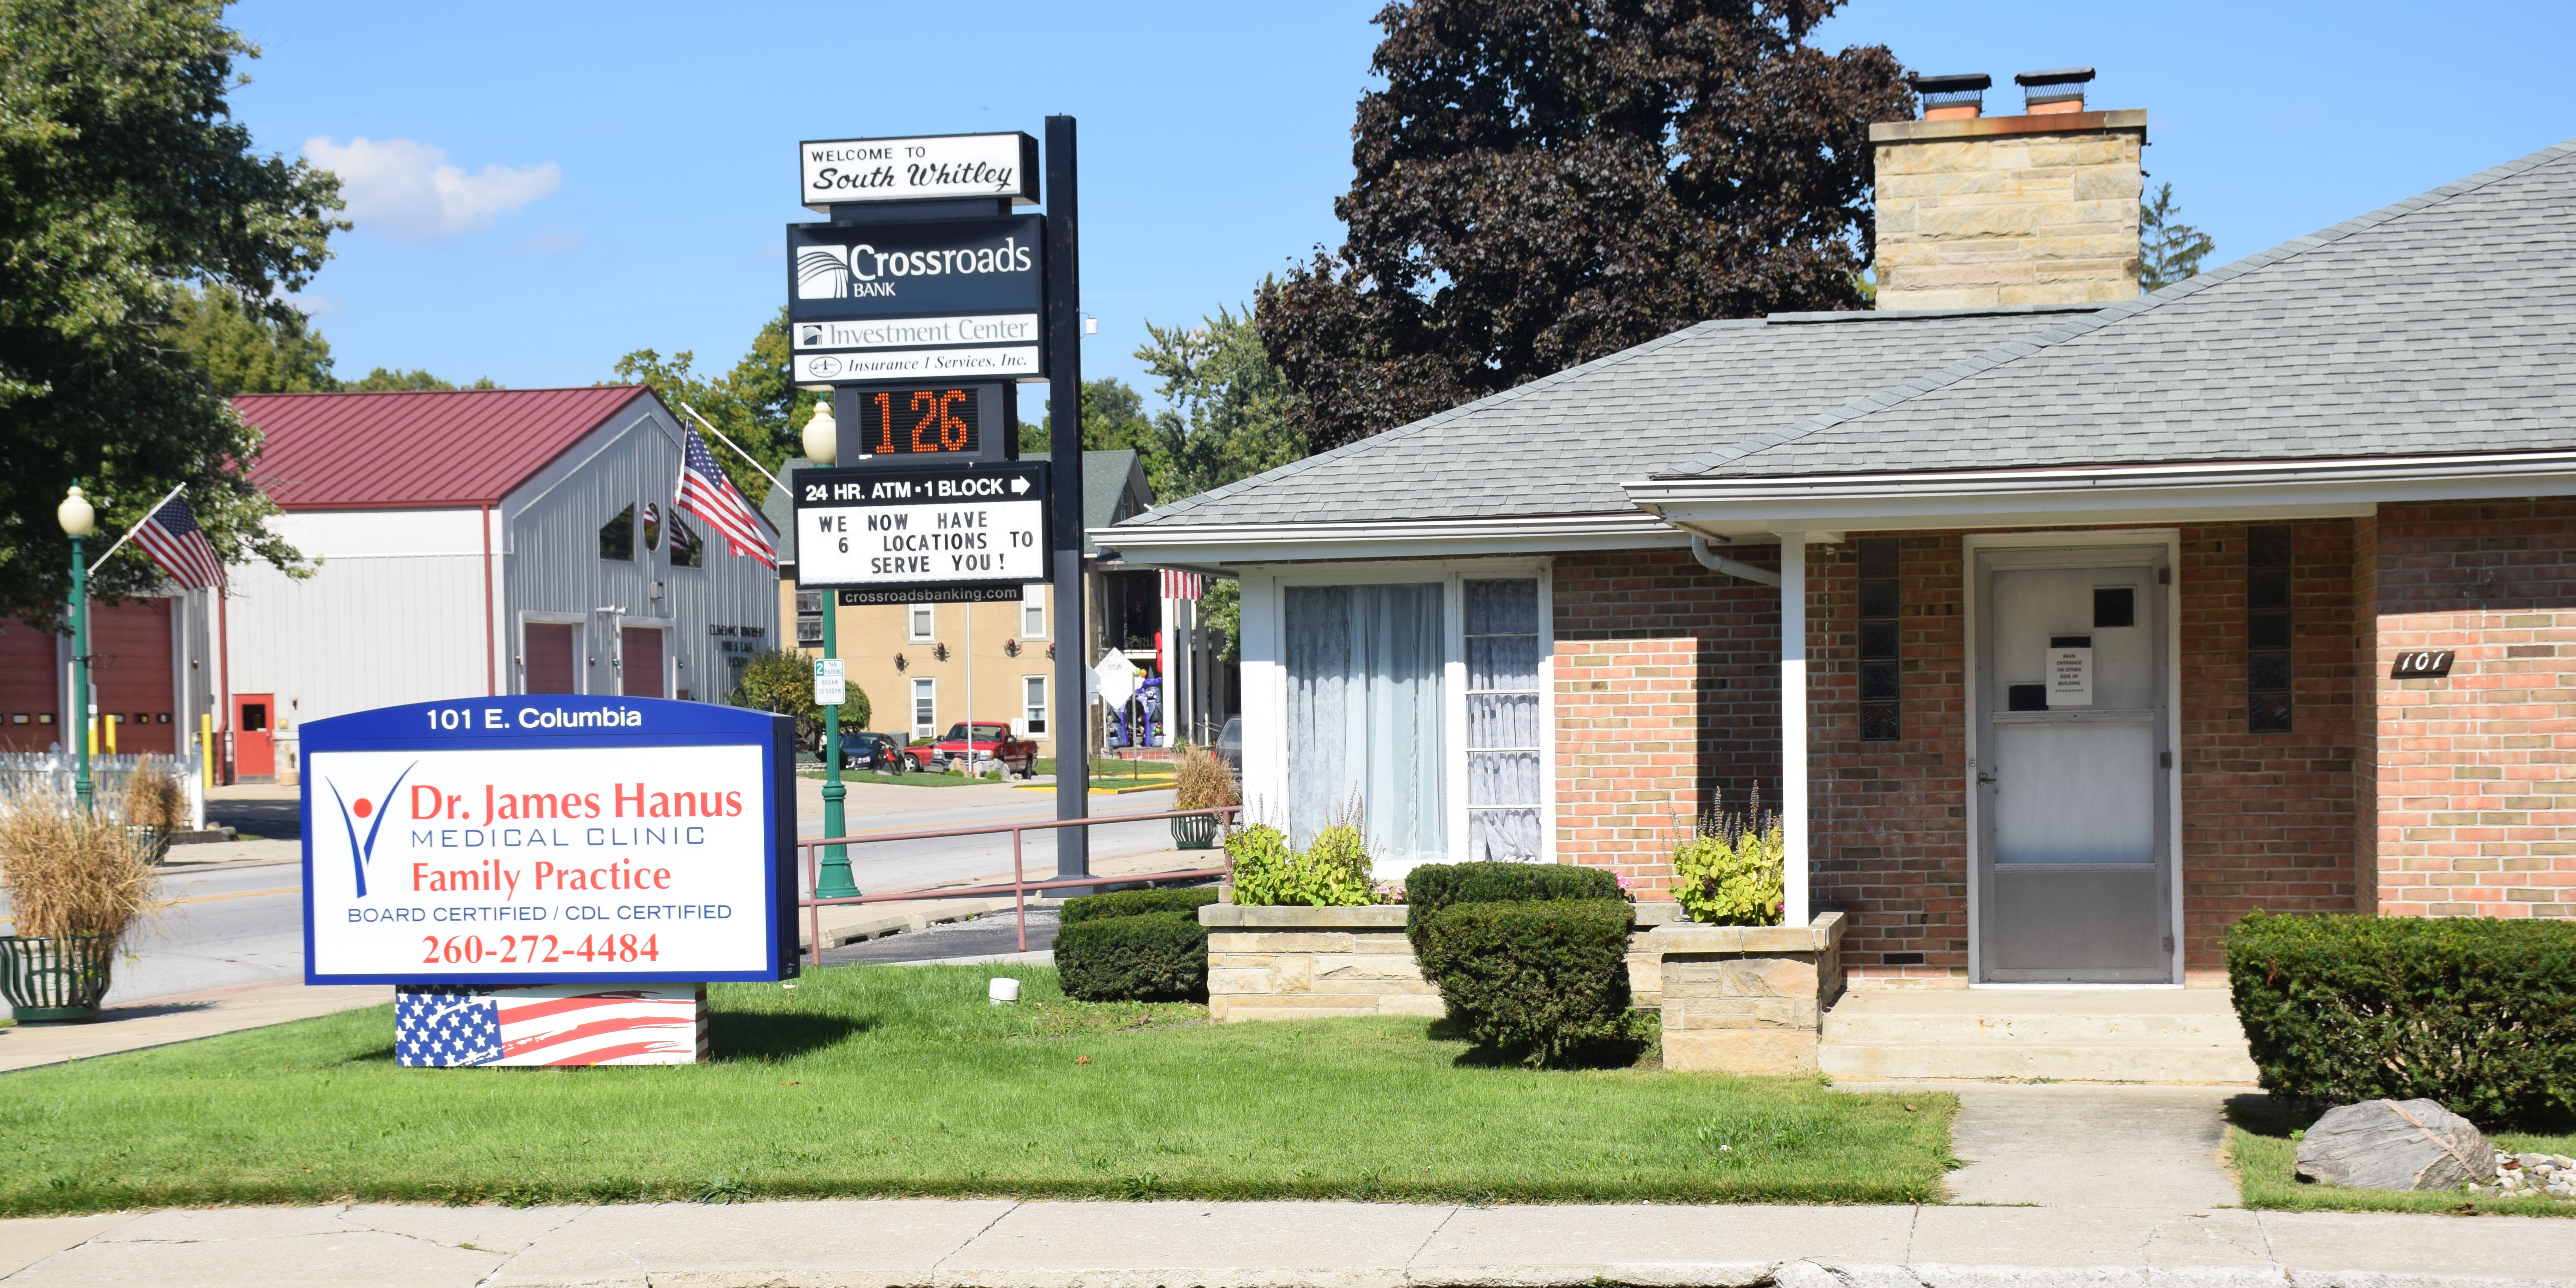 Dr. James Hanus Medical Clinic is located at 101 East Columbia St, South Whitley.